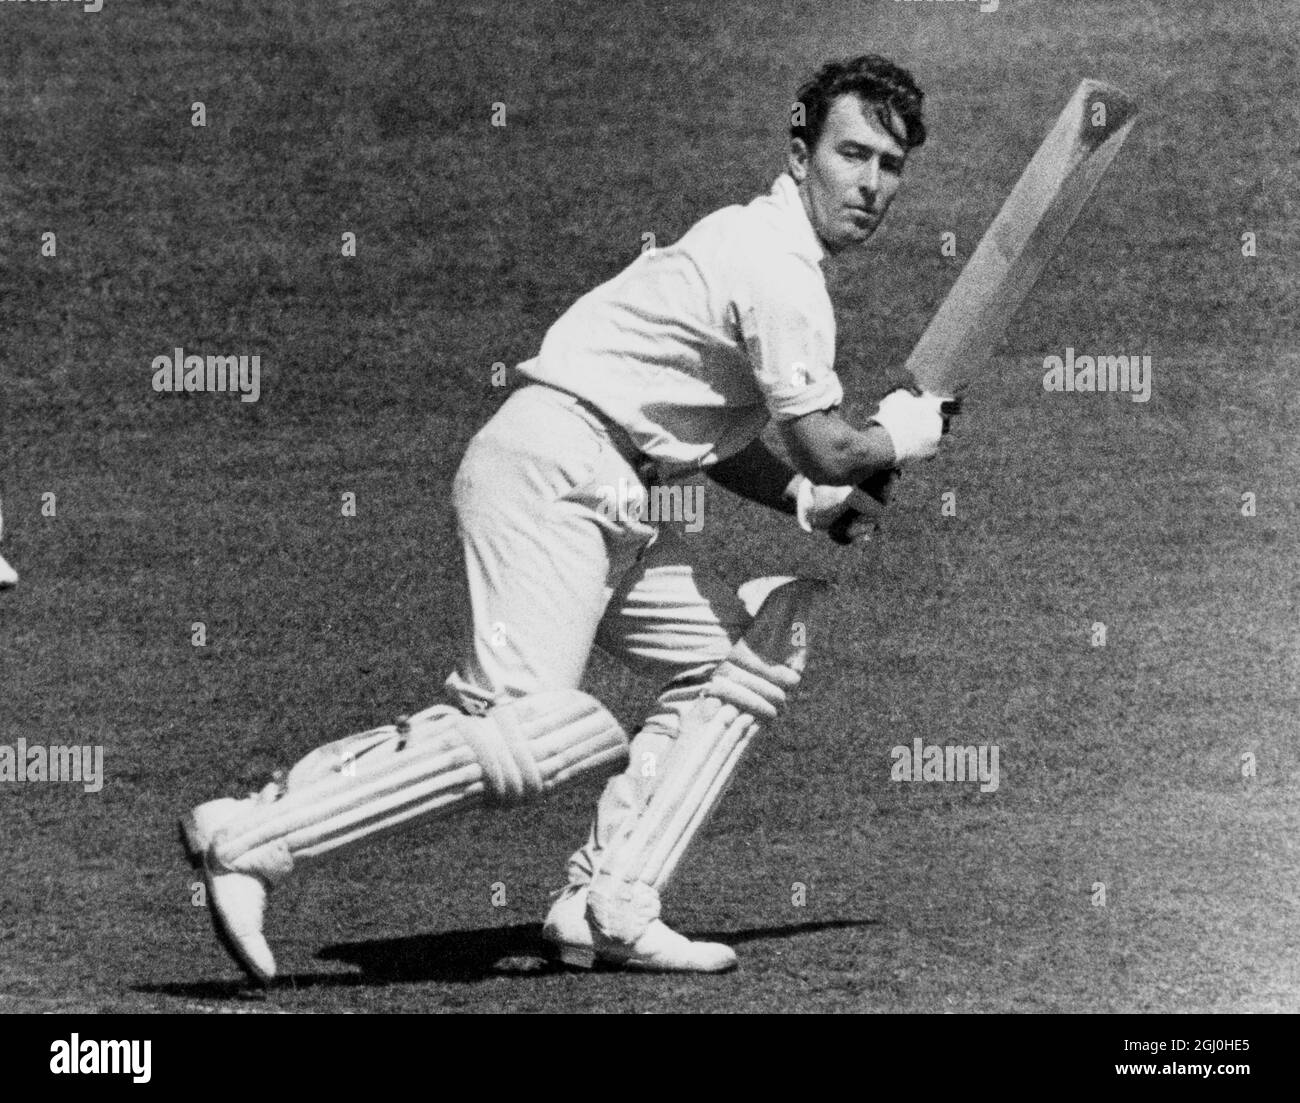 Denis Compton scoring through the slips off the bowling of TF Smailes during the M.C.C. v Yorkshire cricket match at Lords. 3rd May 1947. Stock Photo